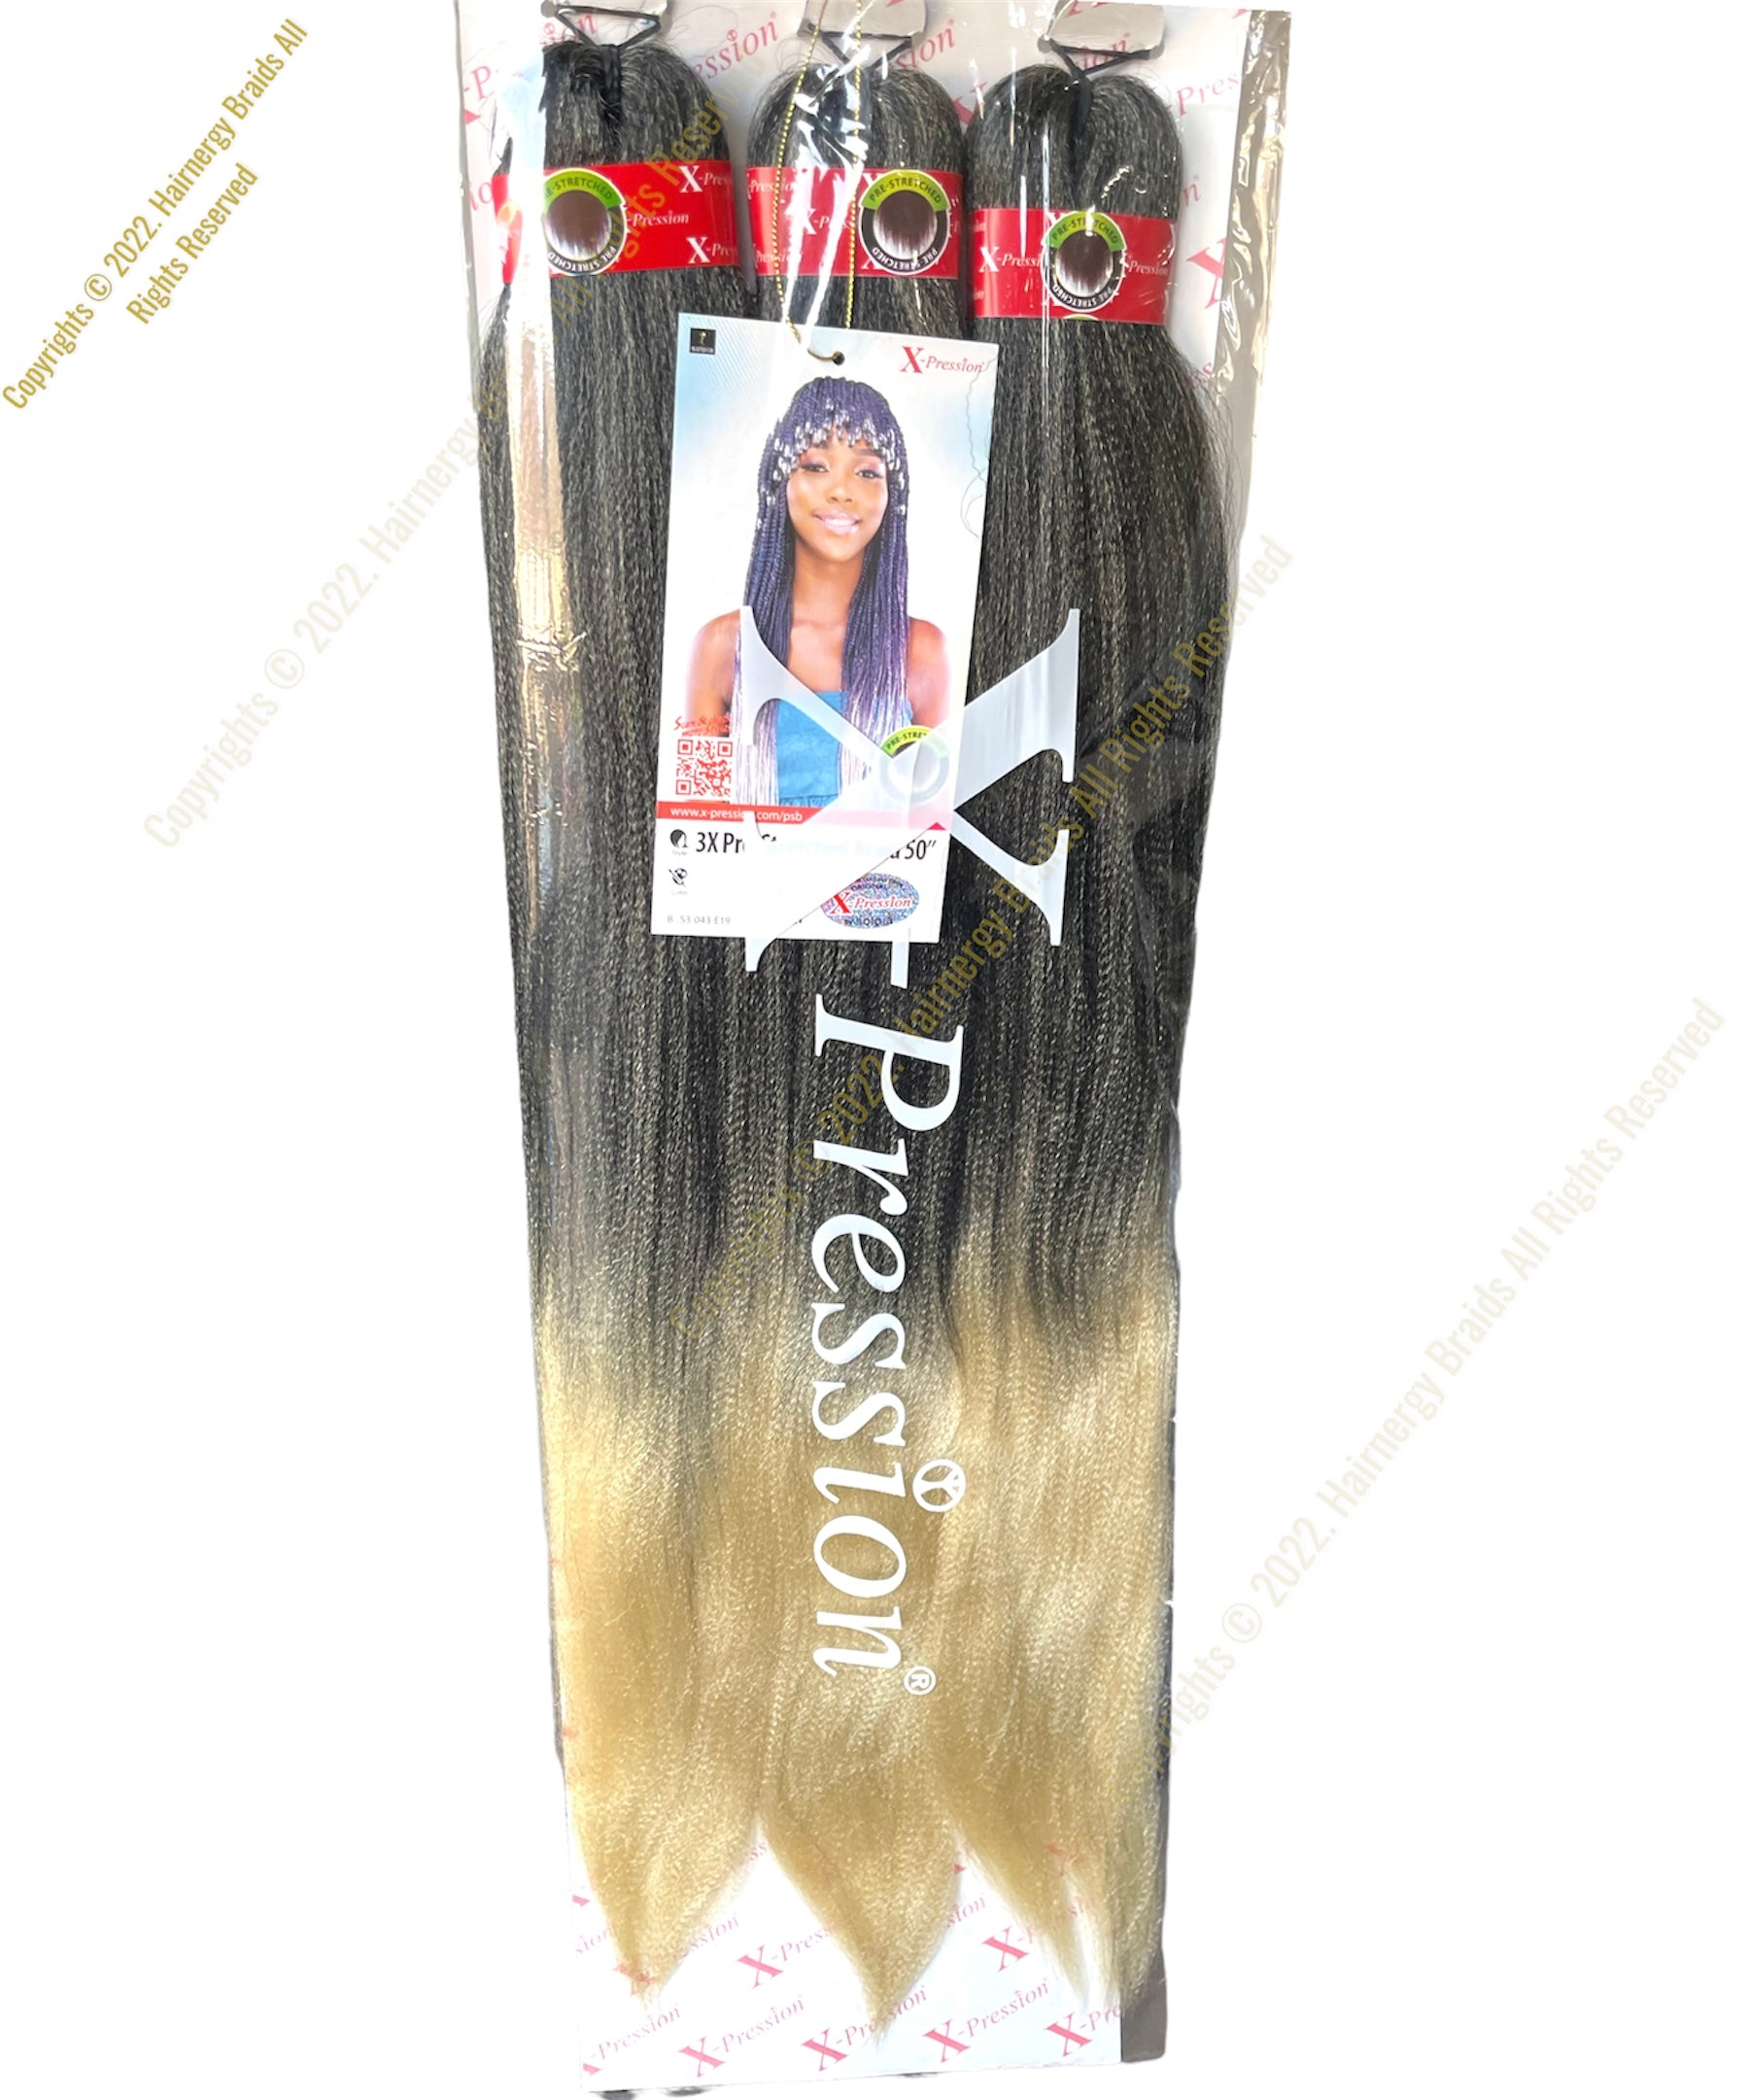 X-Pression Pre-stretched Hair Braiding Extensions 50 Color 33 – Hairnergy  Braids